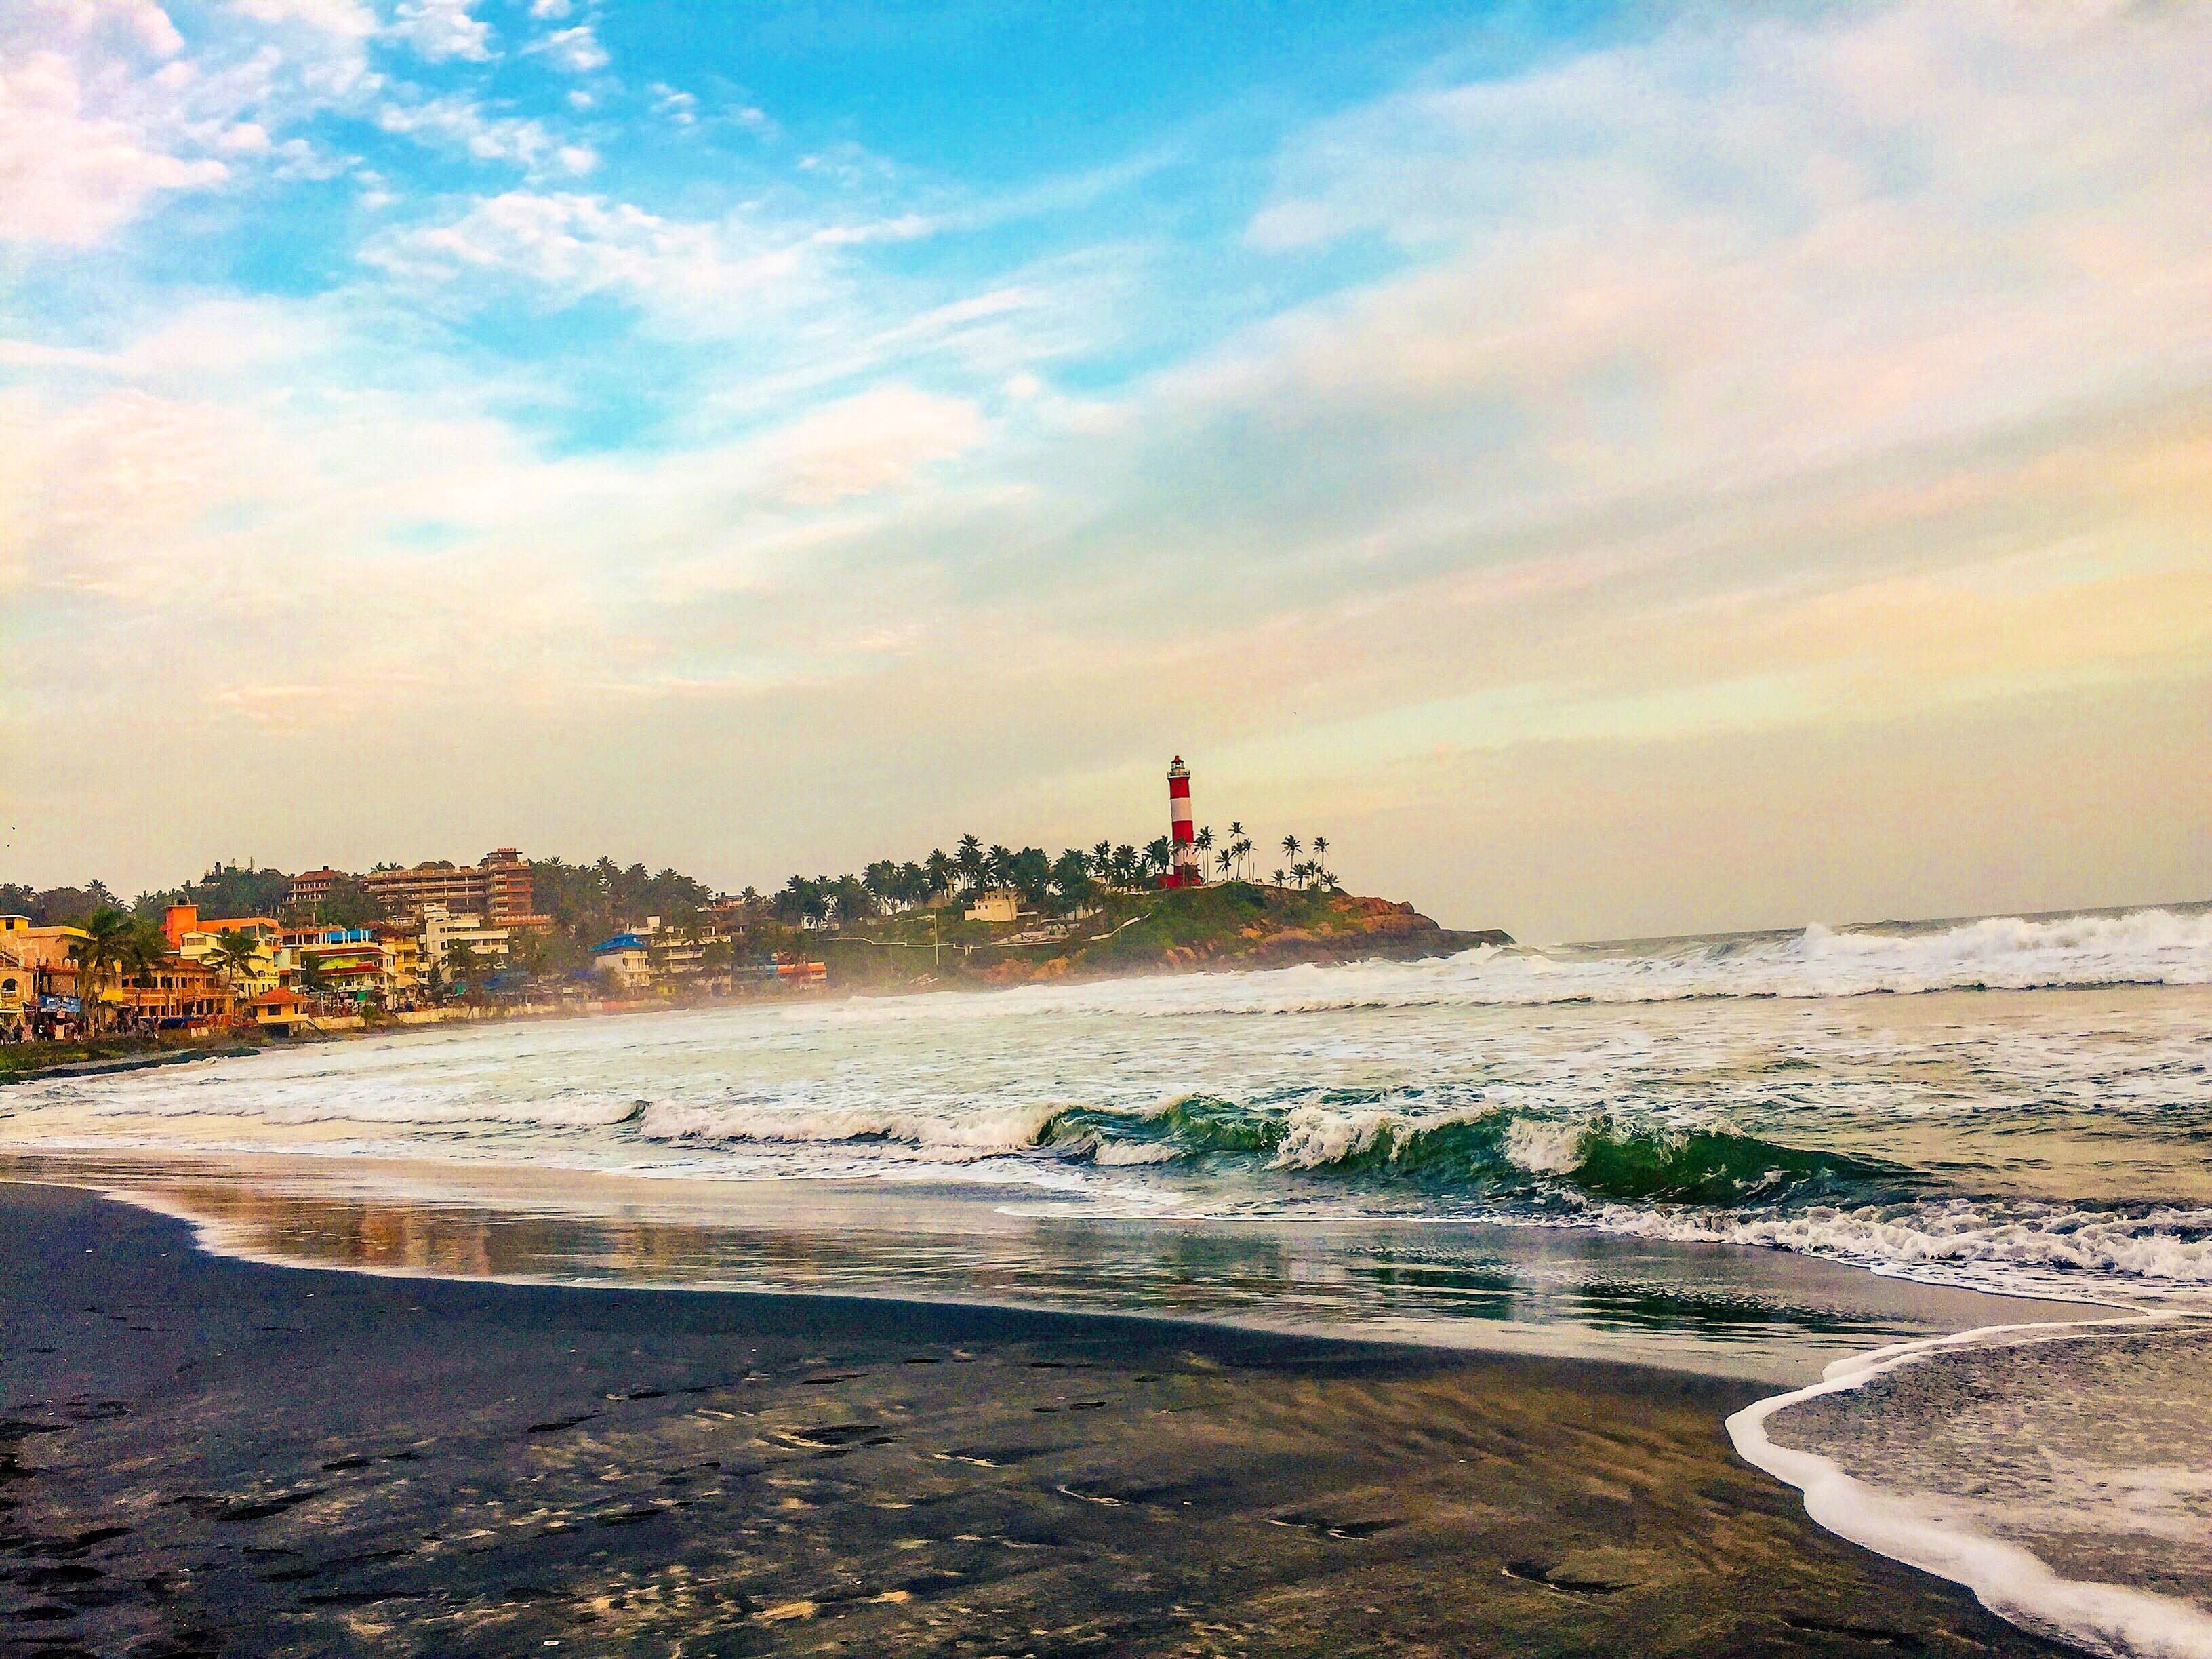 Kovalam meets all of your needs with its picturesque surroundings and breathtaking ocean views.(Unsplash)